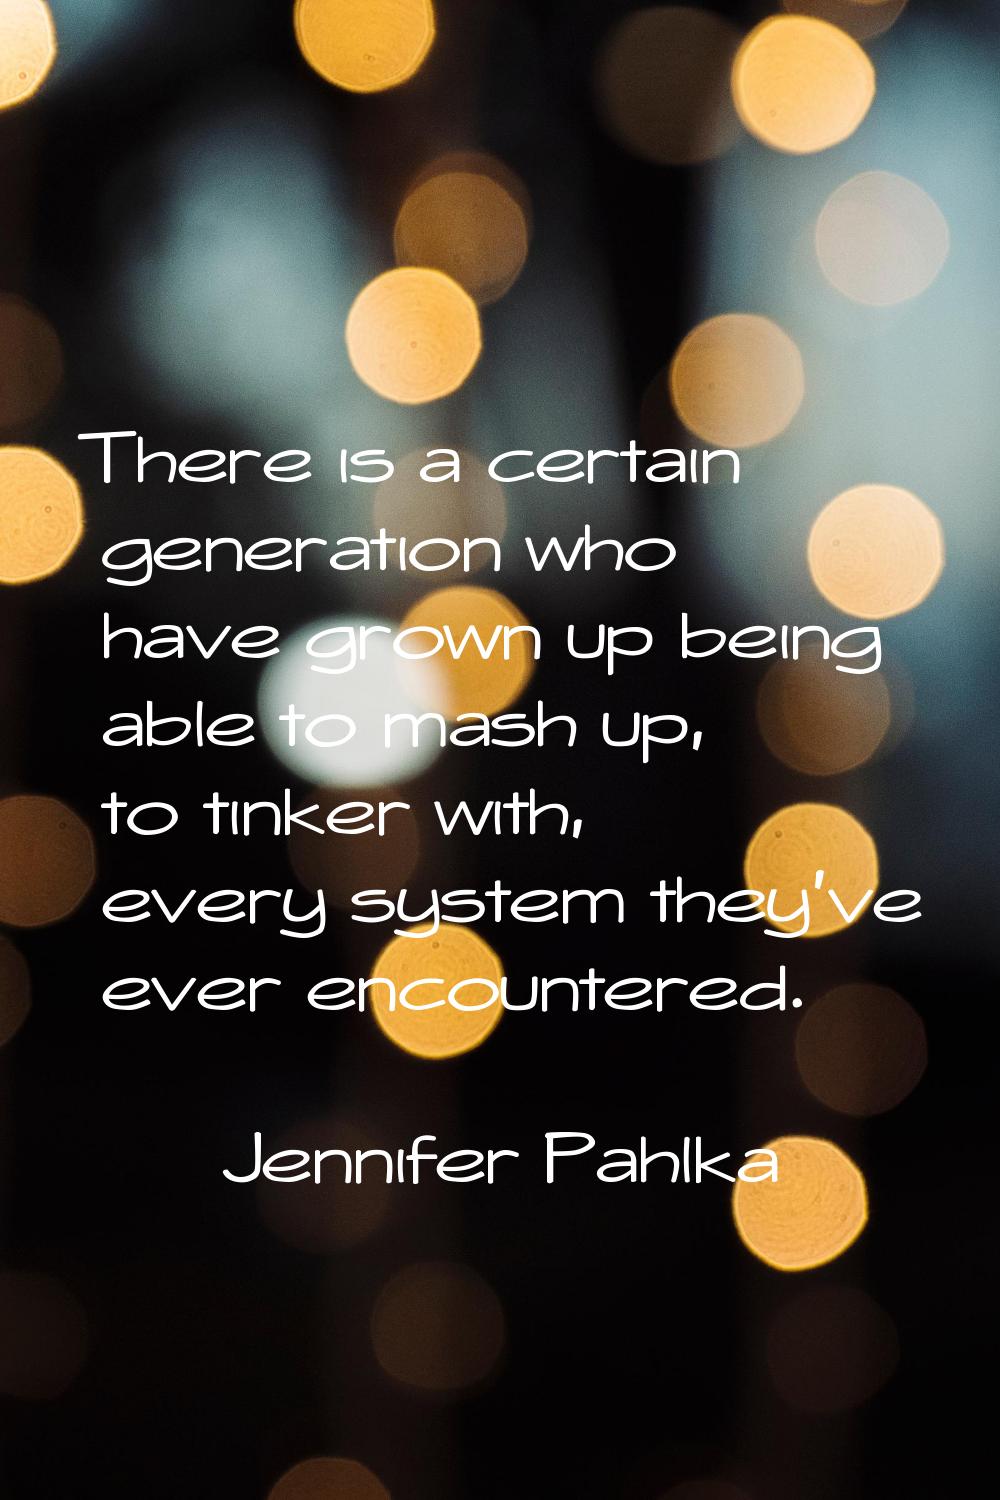 There is a certain generation who have grown up being able to mash up, to tinker with, every system